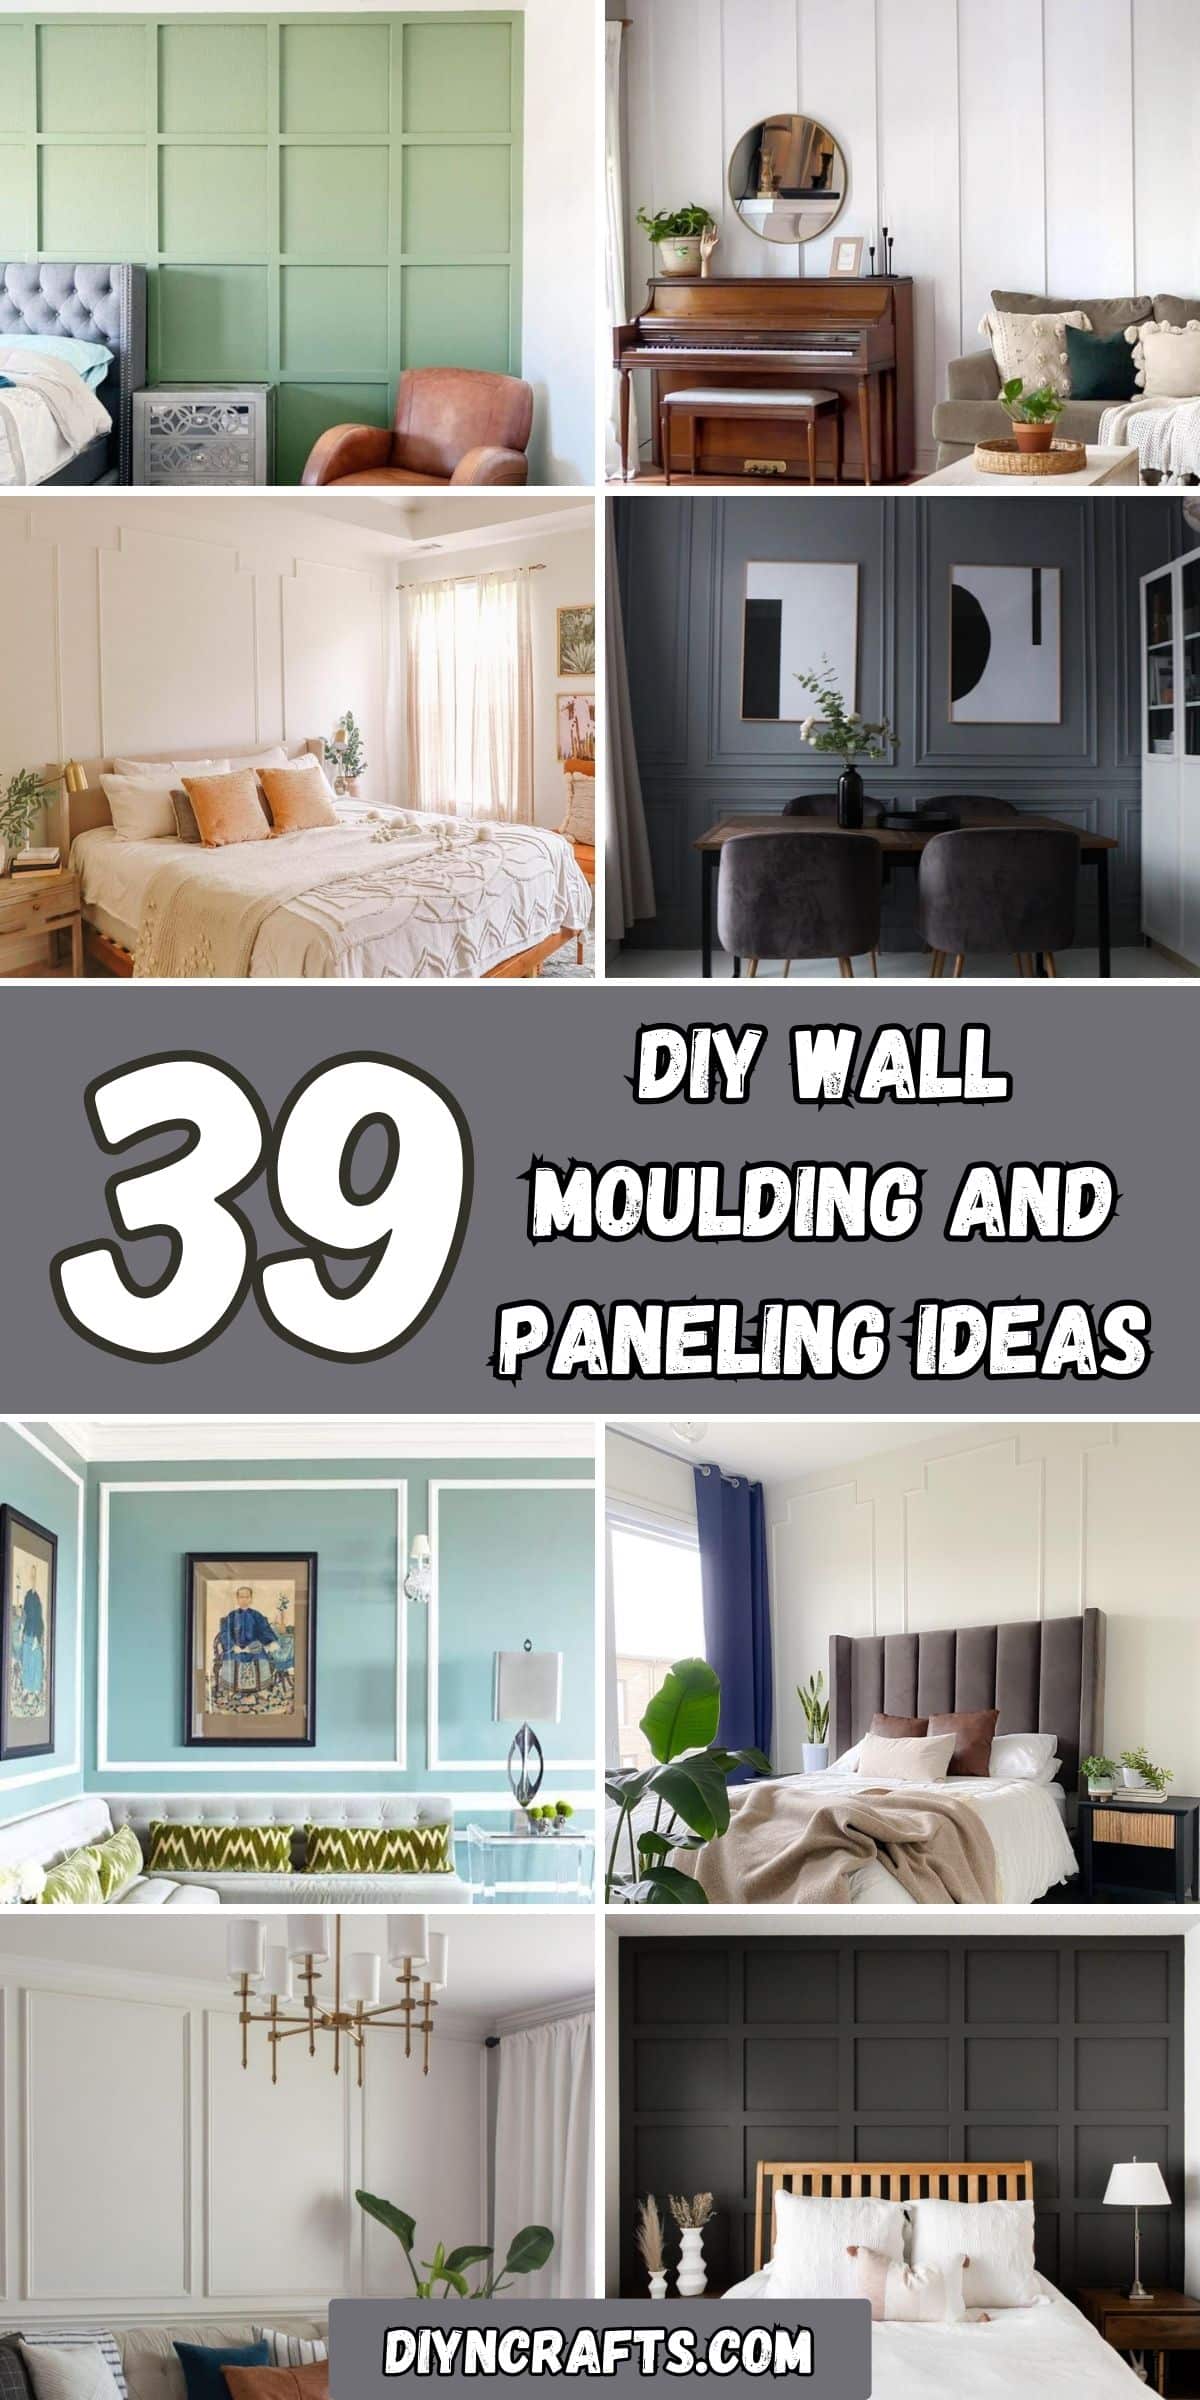 39 DIY Wall Moulding and Paneling Ideas collage.